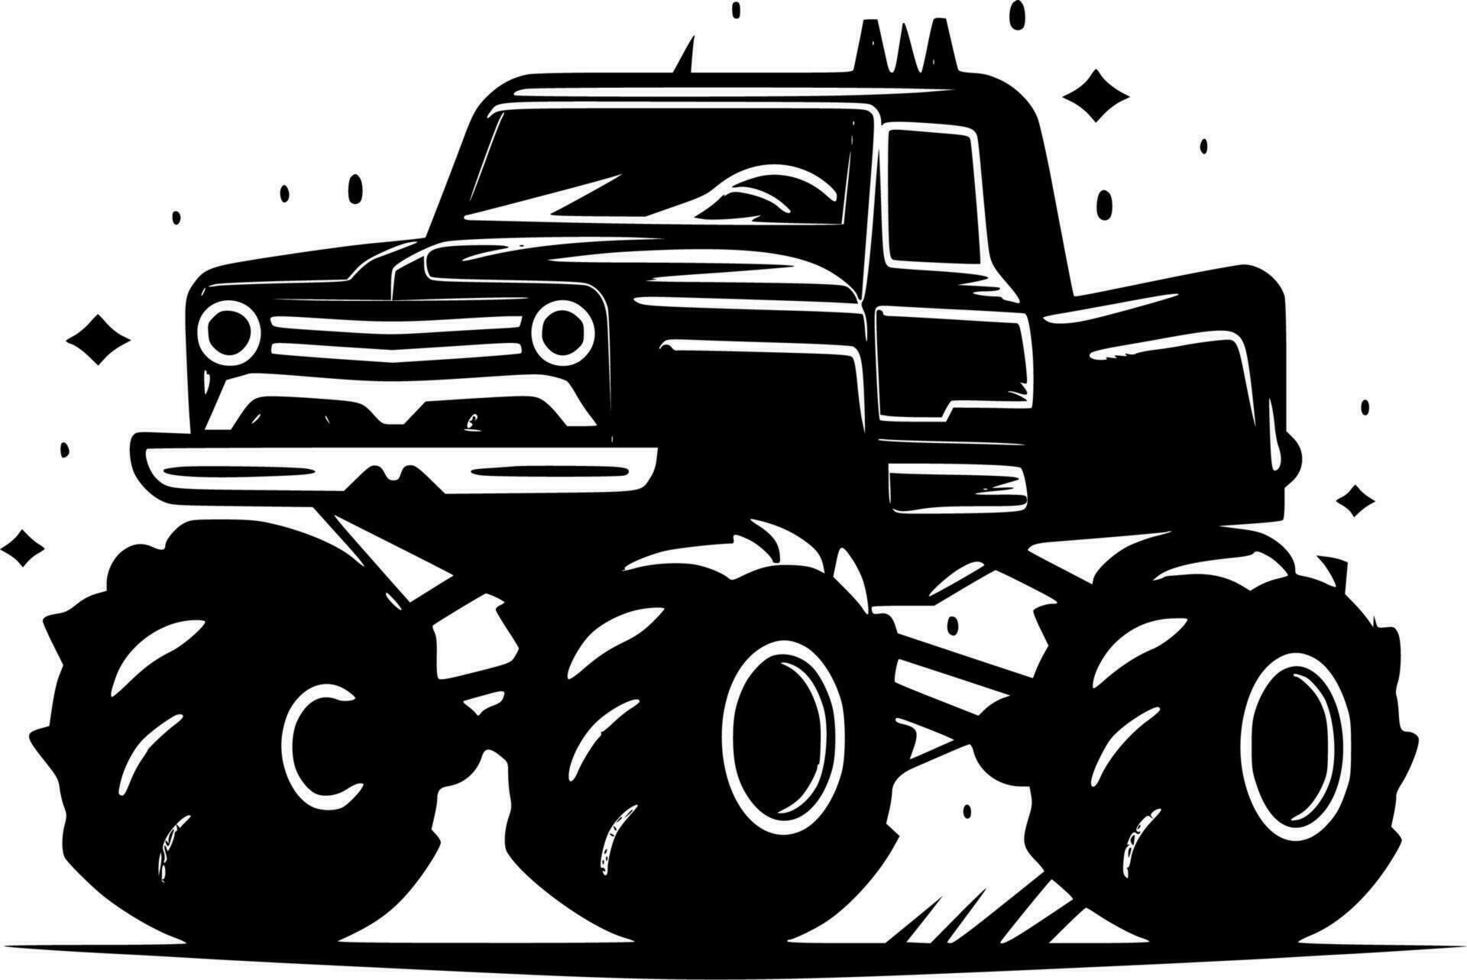 Monster Truck - High Quality Vector Logo - Vector illustration ideal for T-shirt graphic